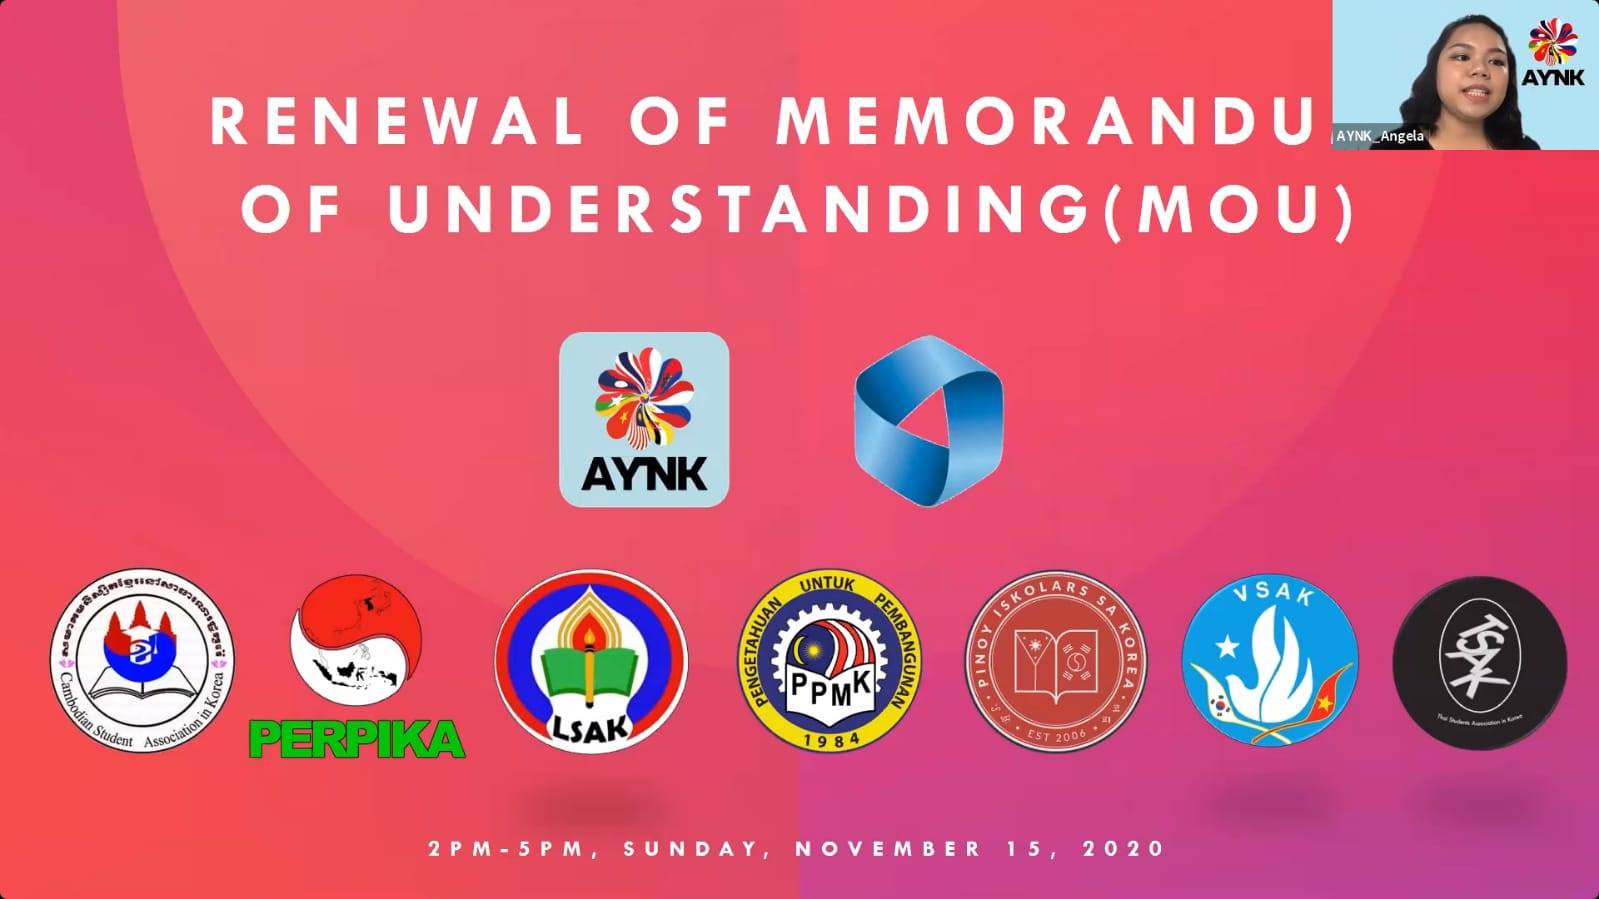 The Renewal of Memorandum of Agreement (MoU) Ceremony between the ASEAN Youth Network in Korea (AYNK) and ASEAN Student Associations in Korea